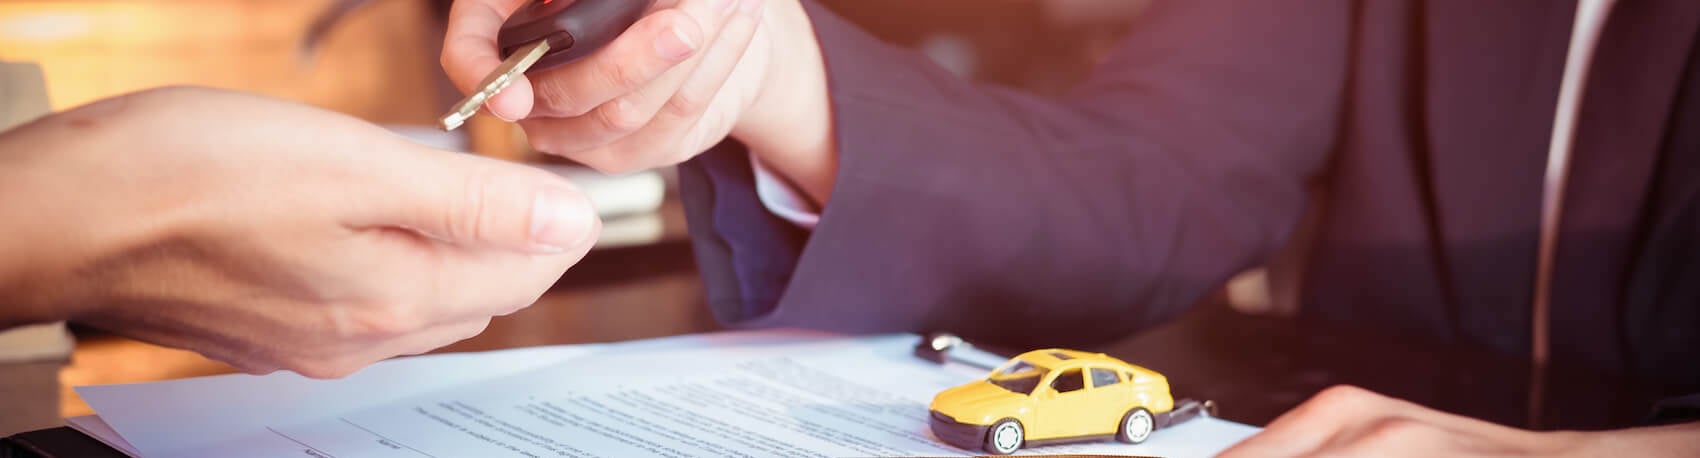 How to Finance a Used Car